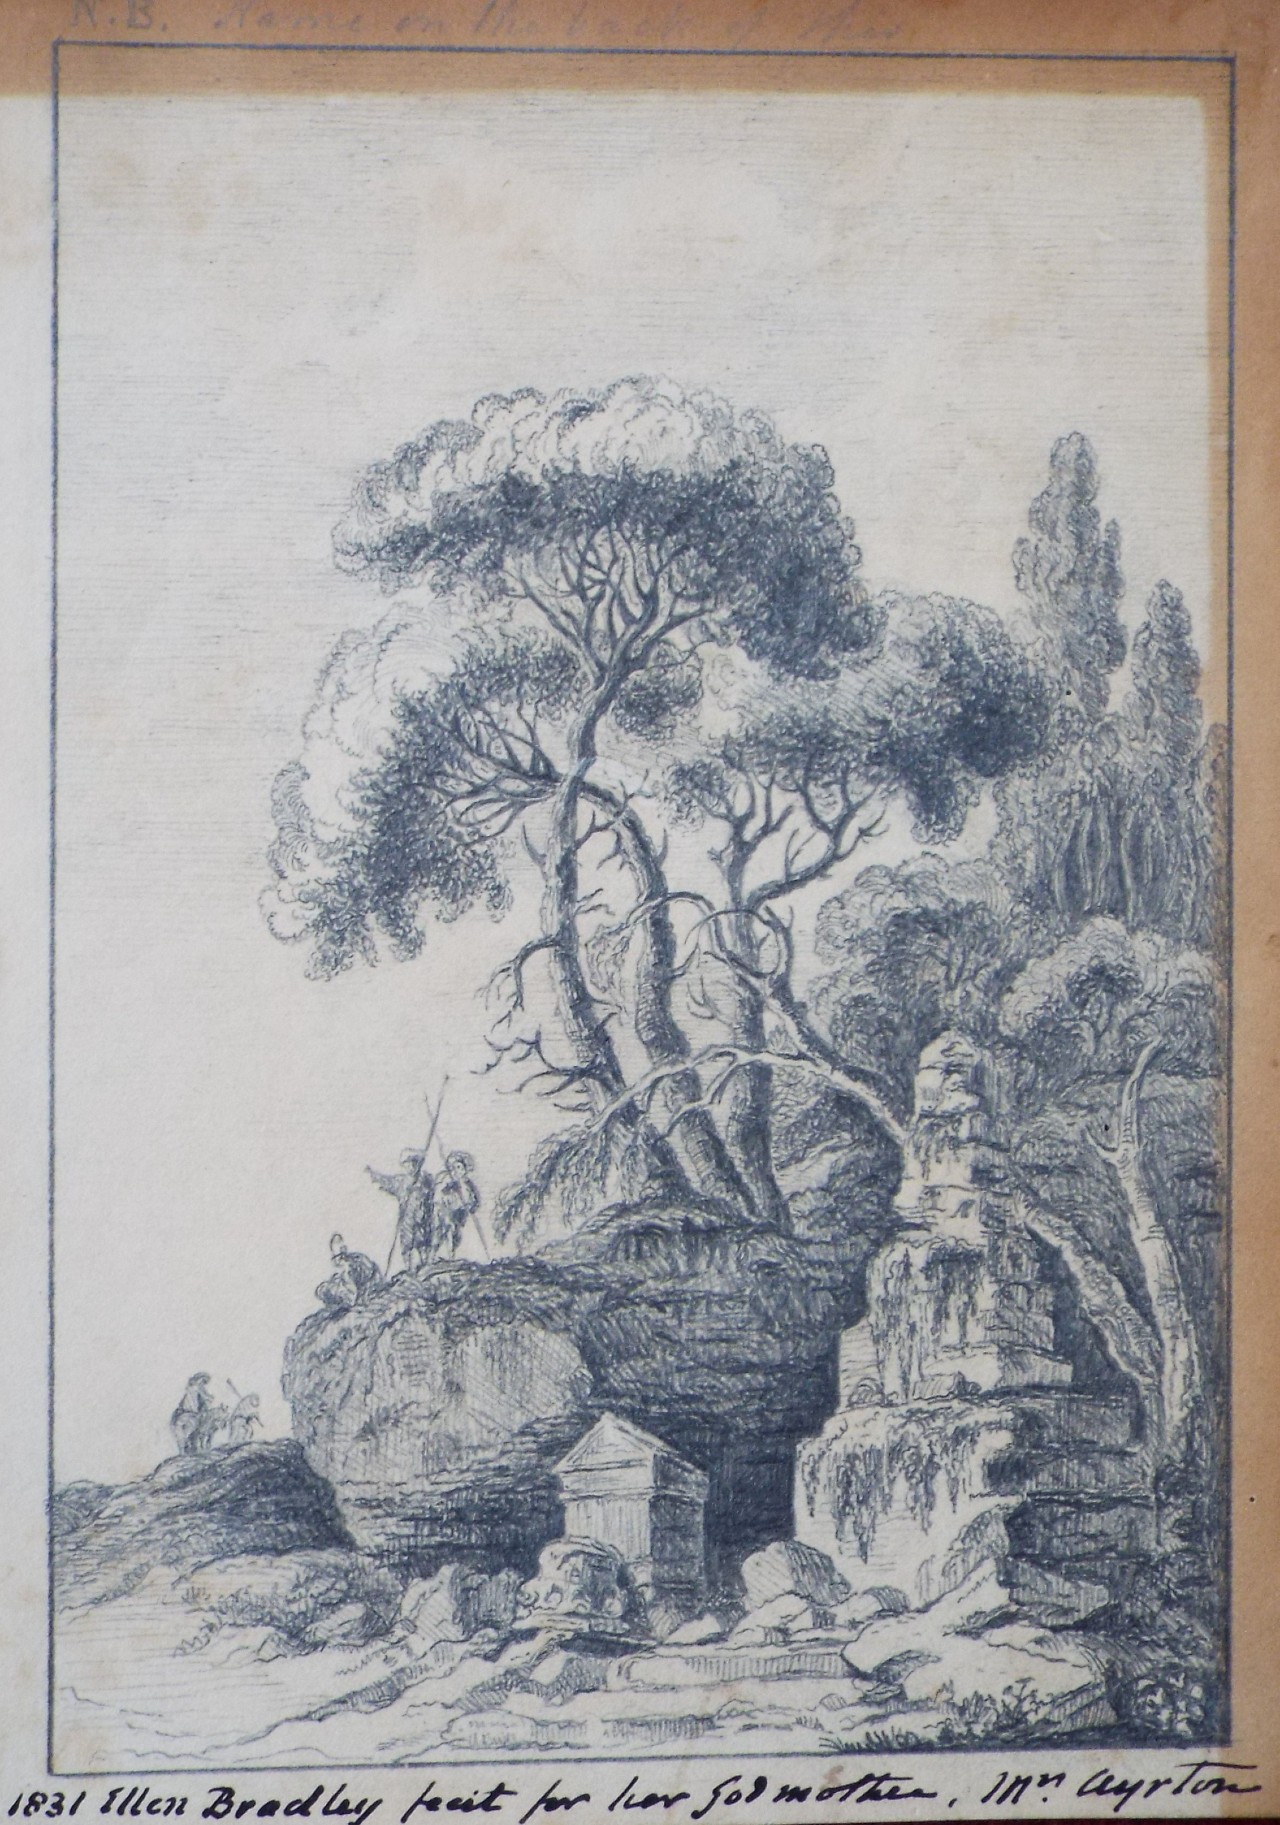 Pencil drawing - Landscape with ancient ruins